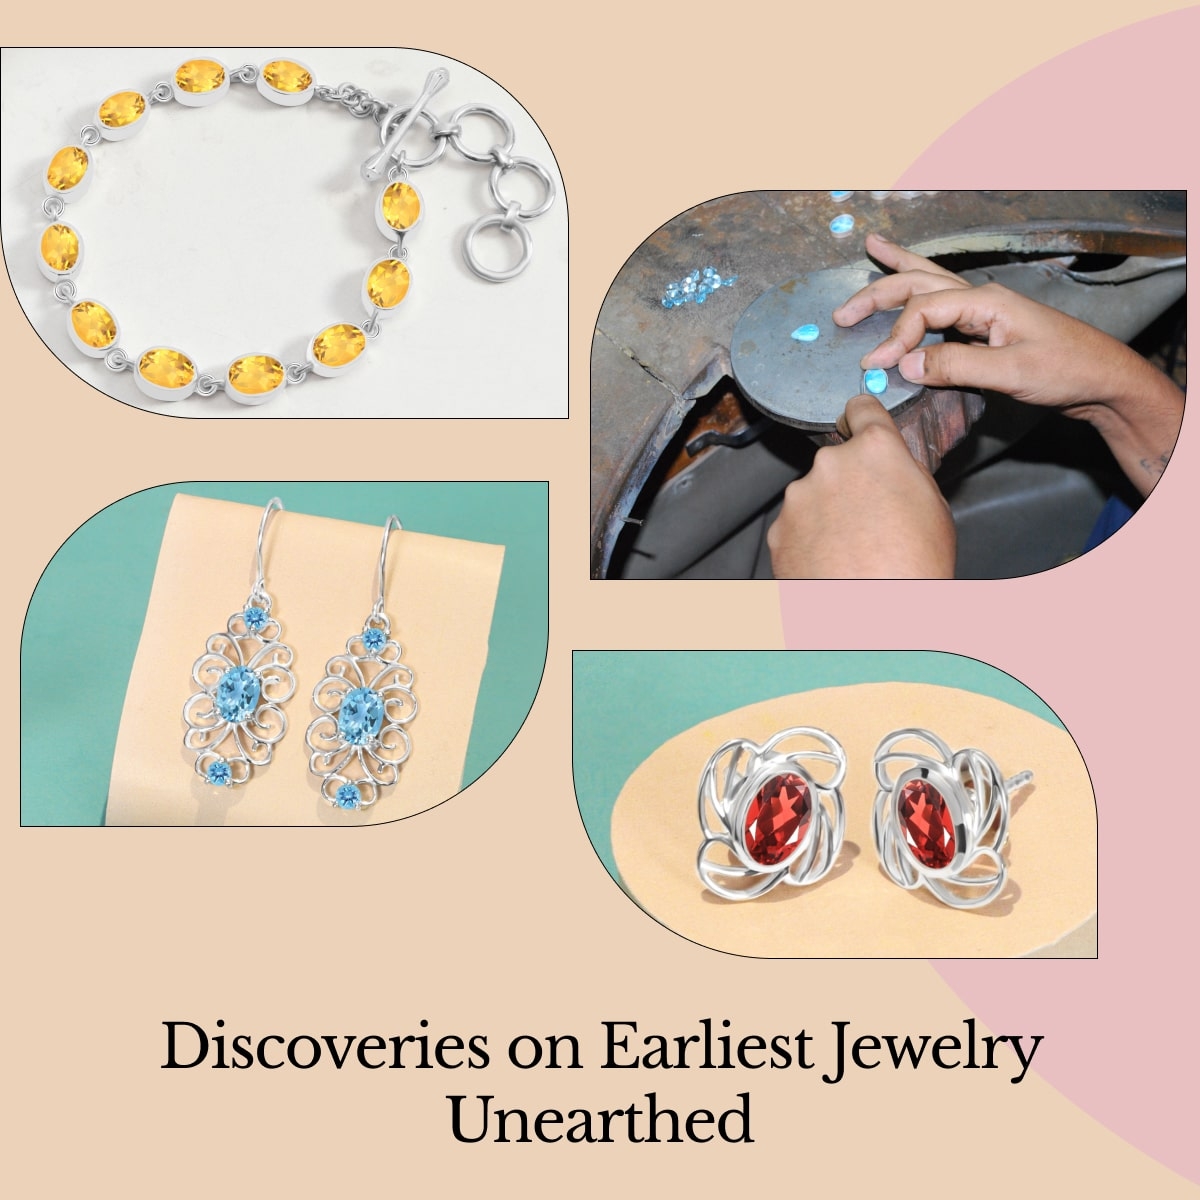 What Was Discovered Regarding the Earliest Jewelry Used?